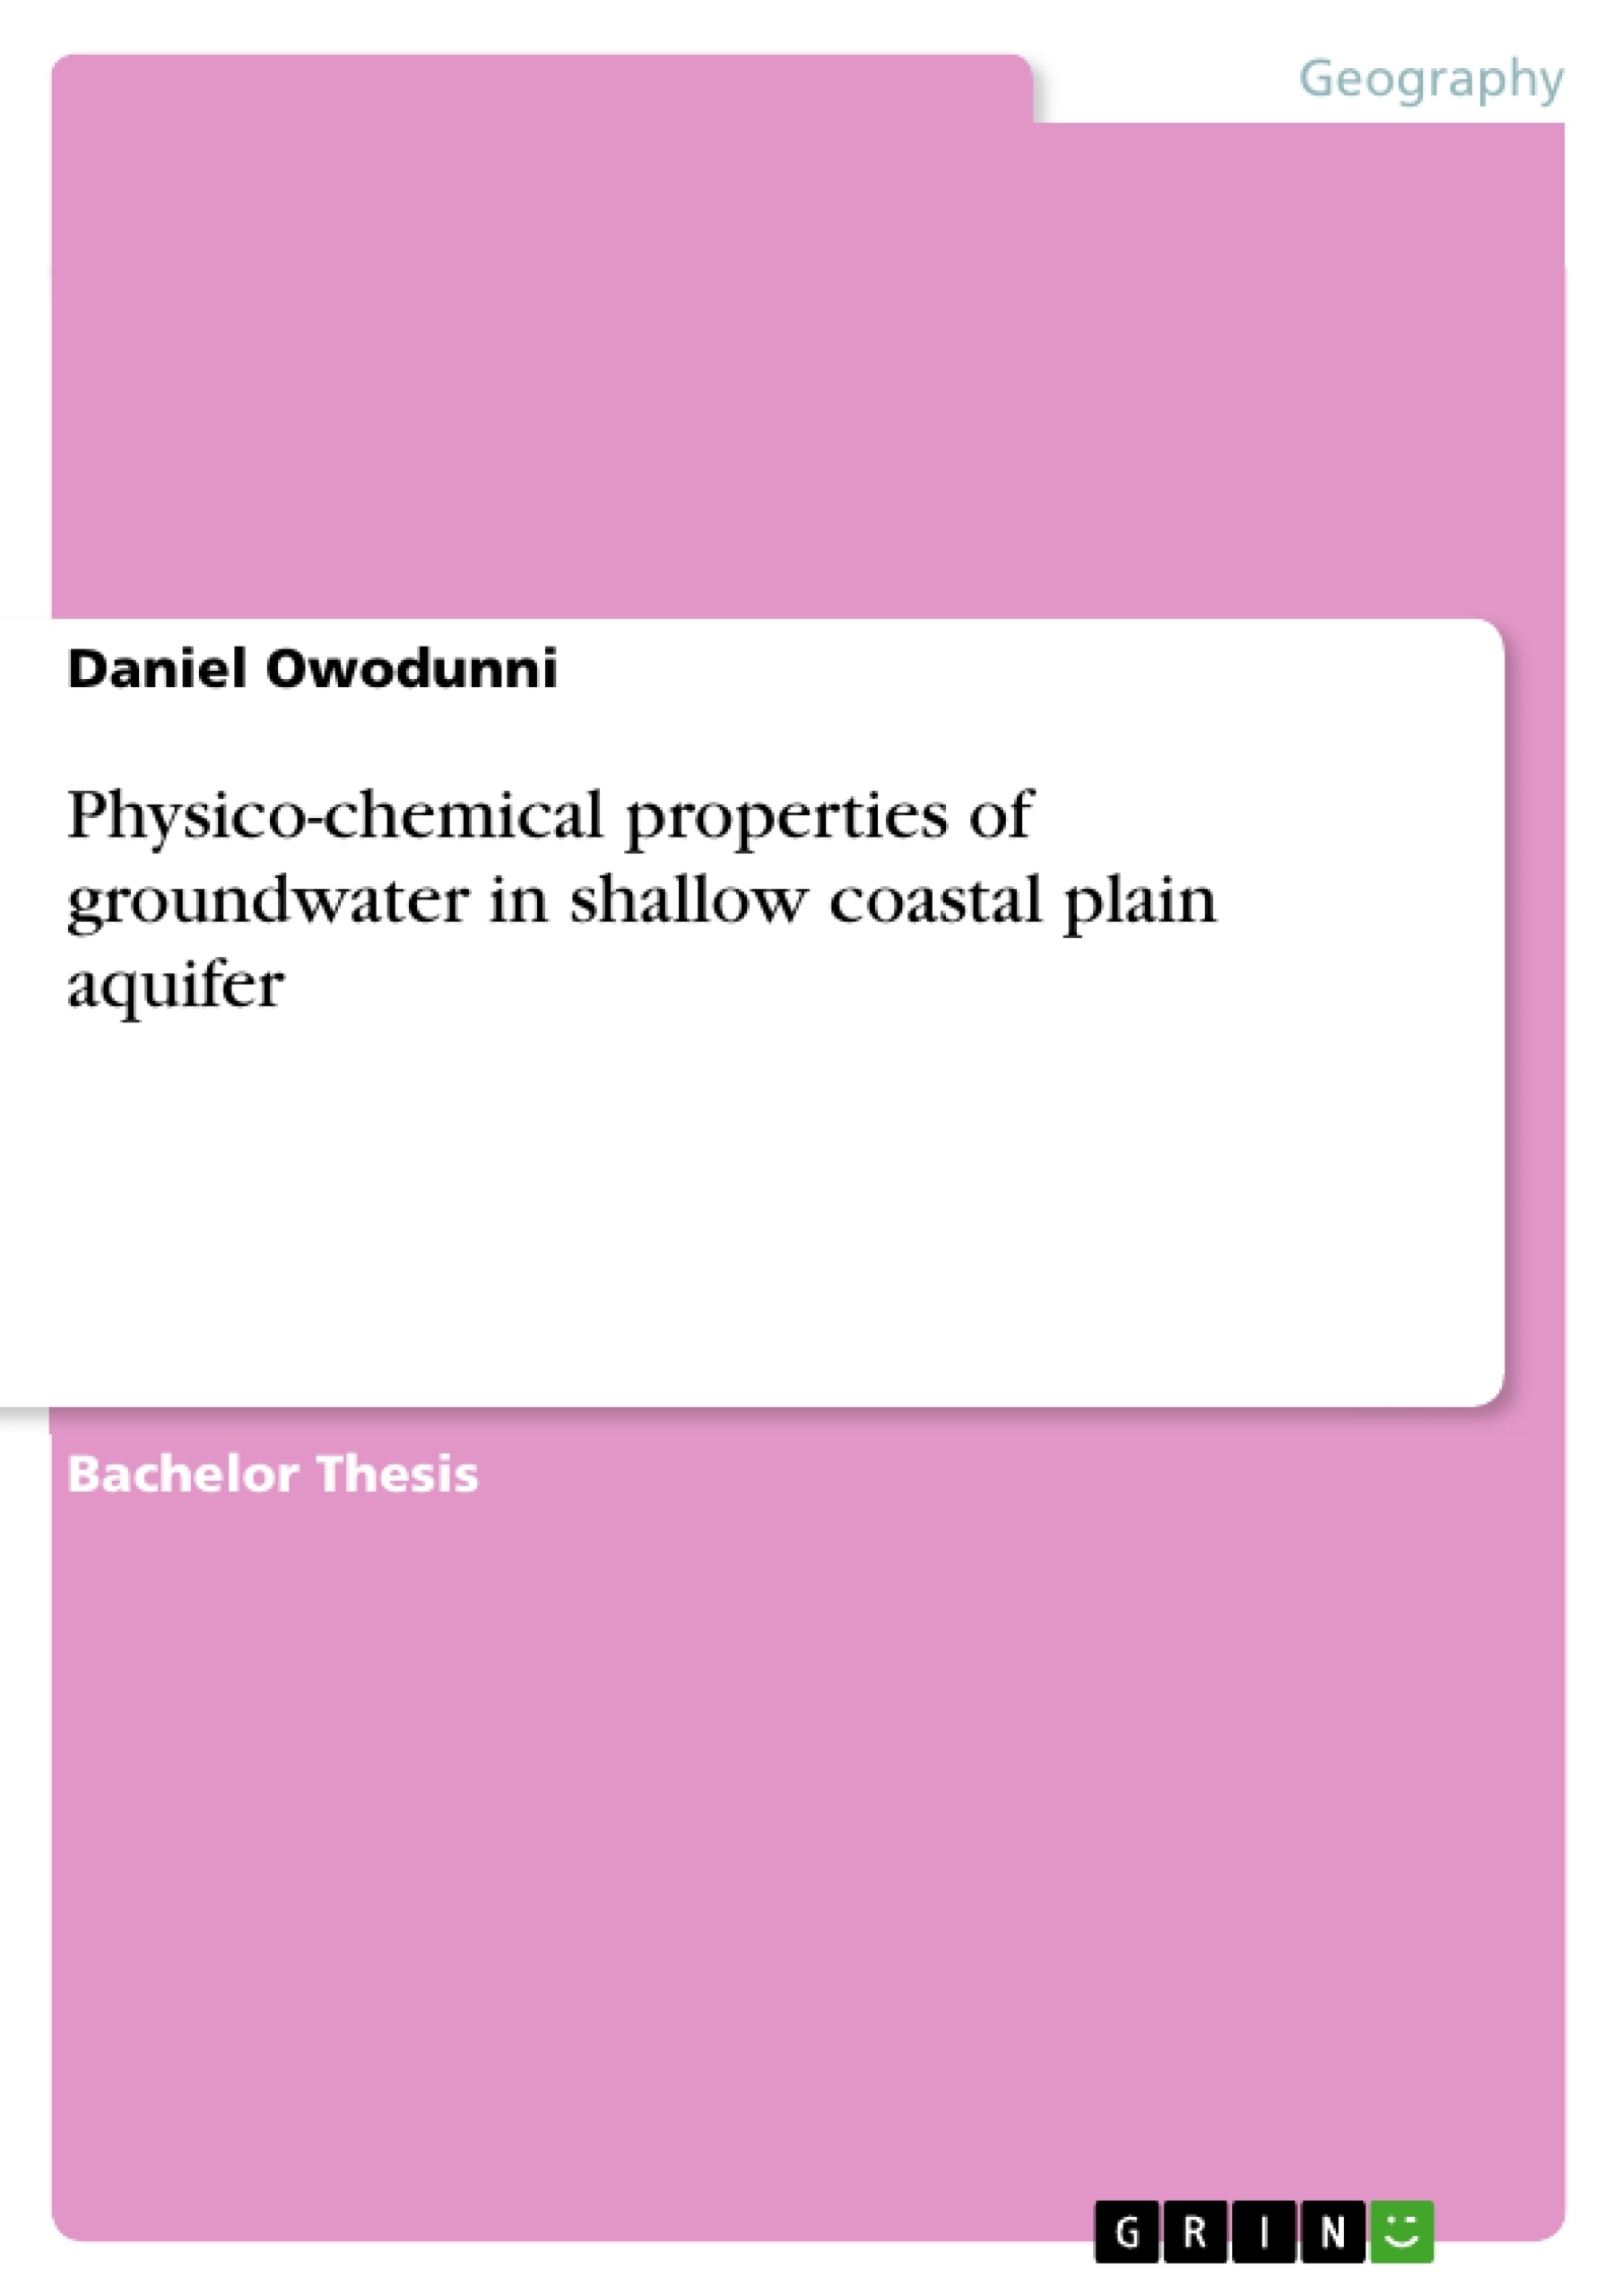 Title: Physico-chemical properties of groundwater in shallow coastal plain aquifer